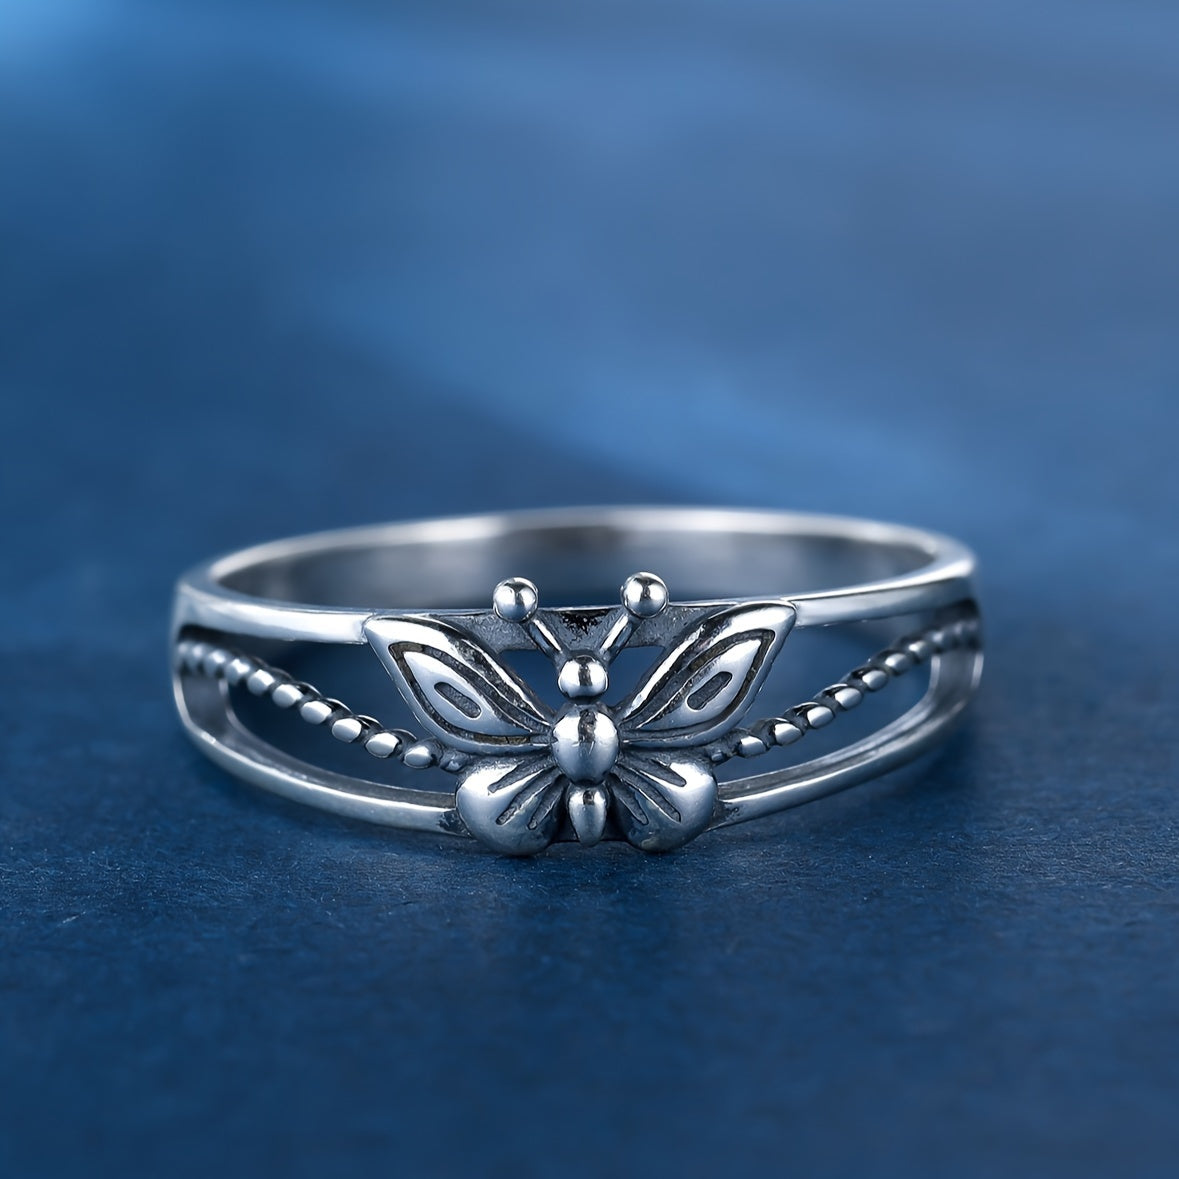 925 Sterling Silver Ring Retro Butterfly Design High Quality Jewelry Match Daily Outfits Party Accessory Gift For Your Cool & Sweet Lover